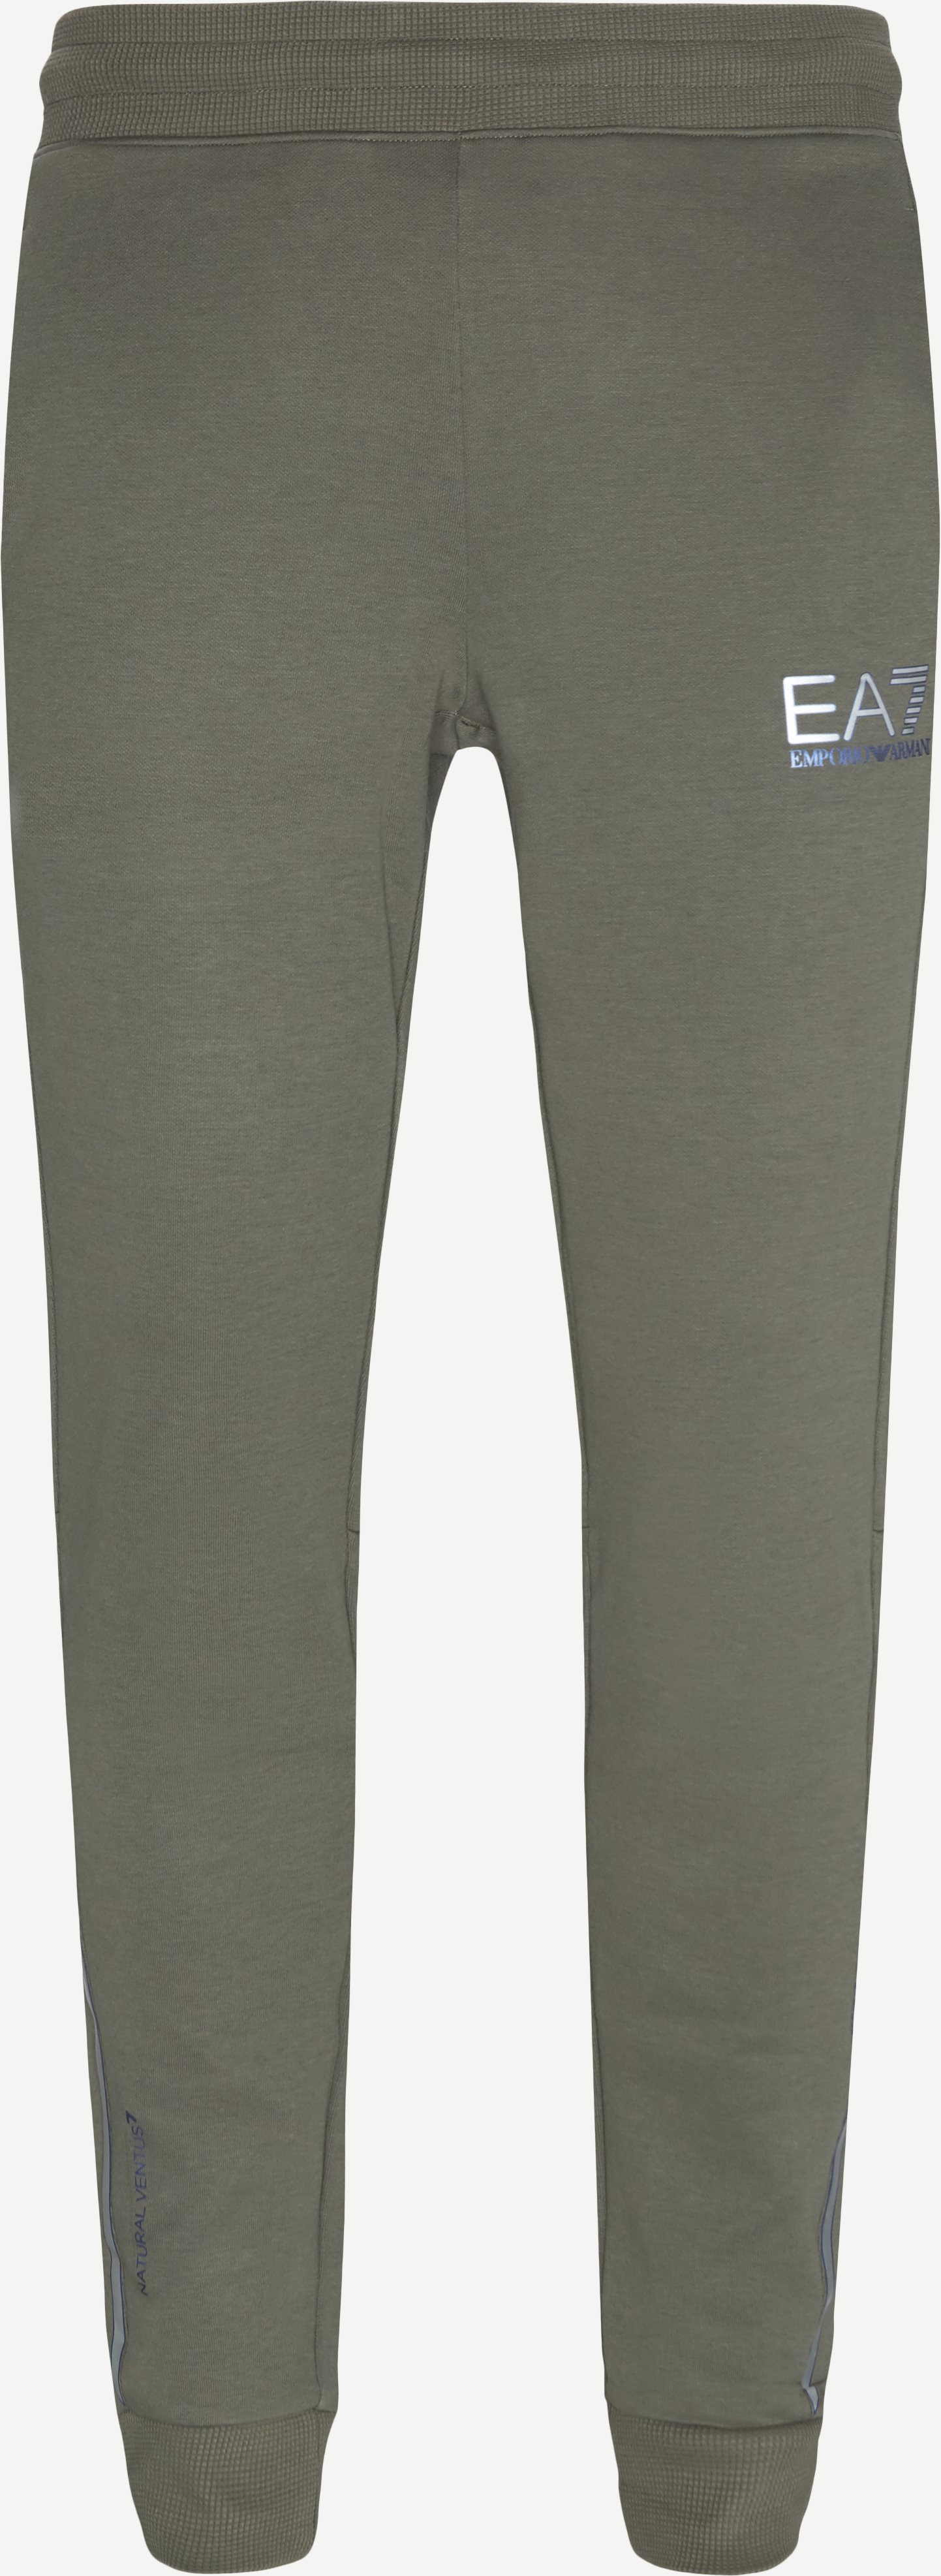 Sweatpants - Trousers - Regular fit - Army